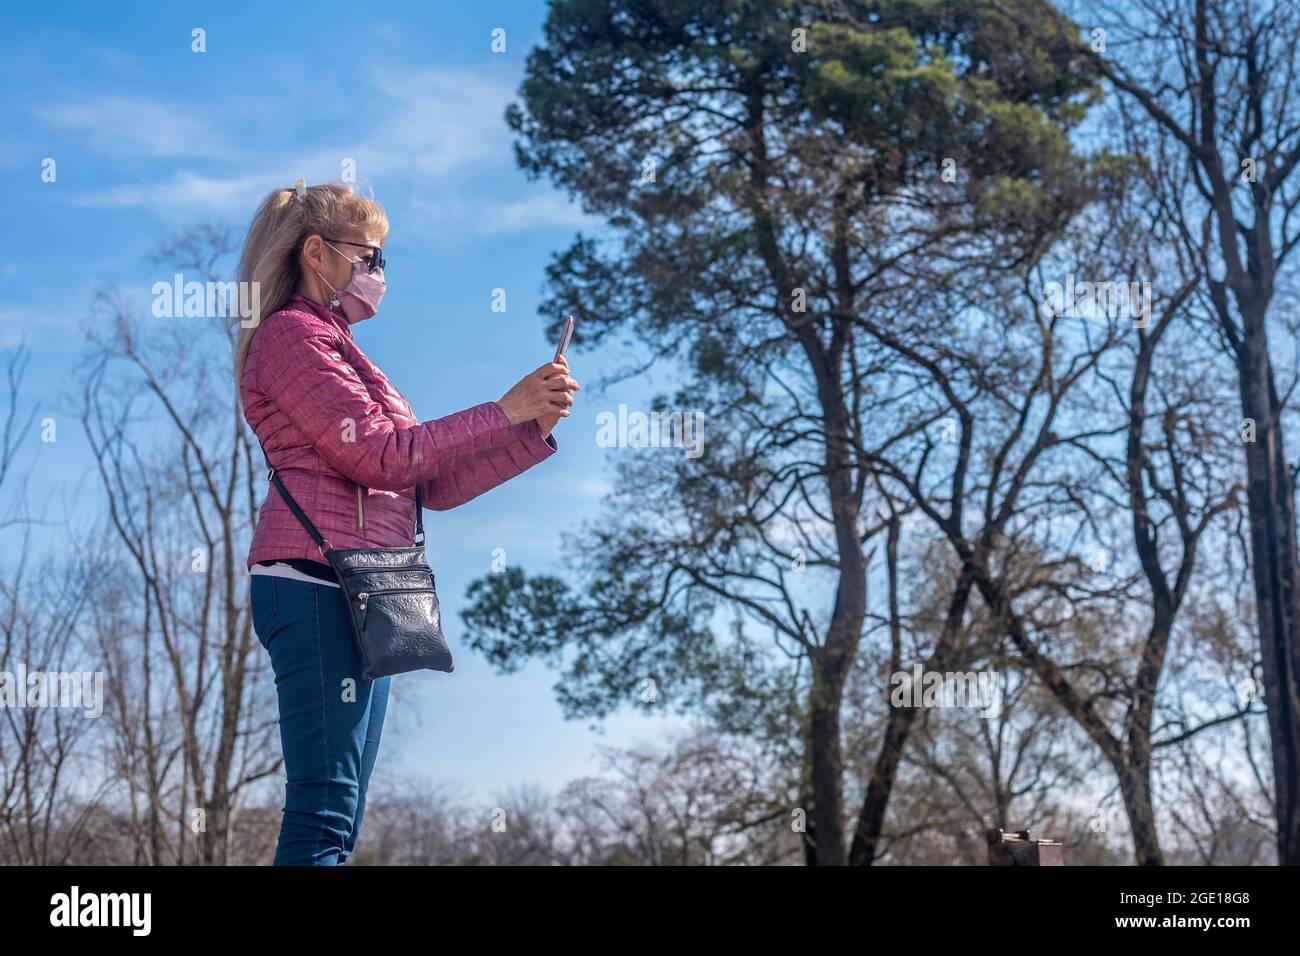 Cropped view of an adult woman with face mask and sunglasses taking a picture in a park with some trees behind. Stock Photo